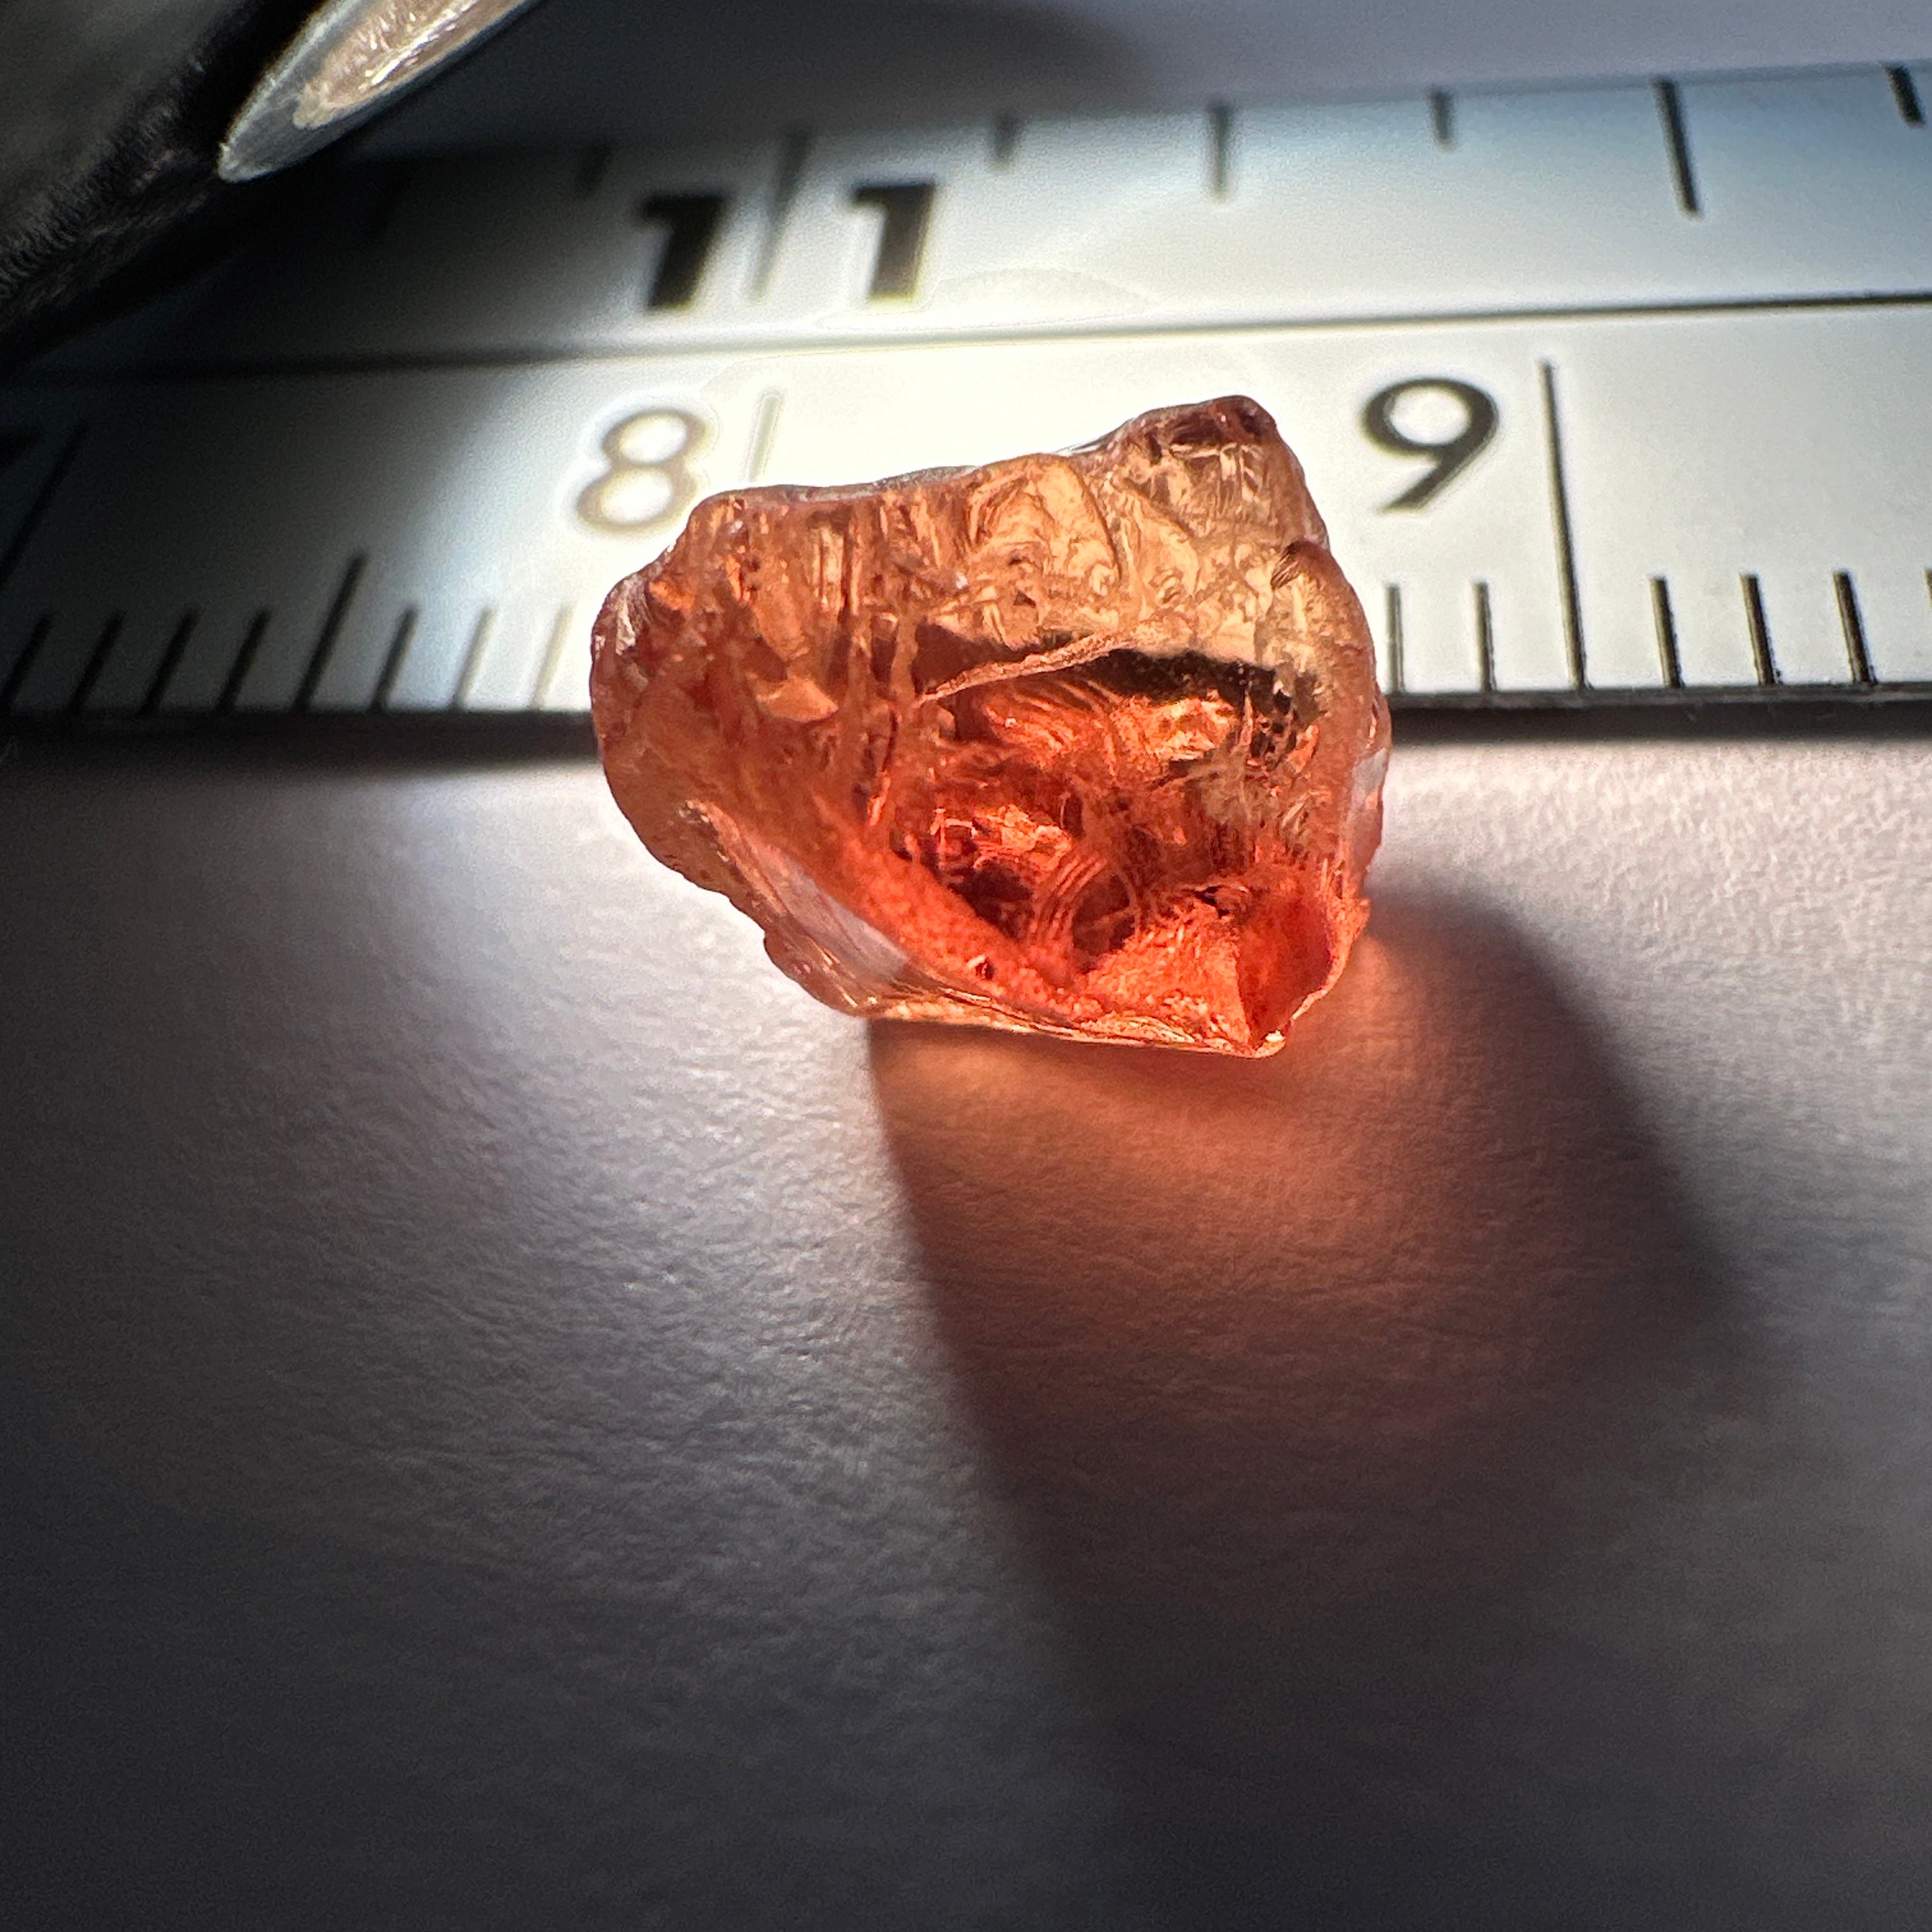 2.60ct Colour Change Garnet, Tanzania, Untreated Unheated, vs-si (one veil and slight inclusion on skin)